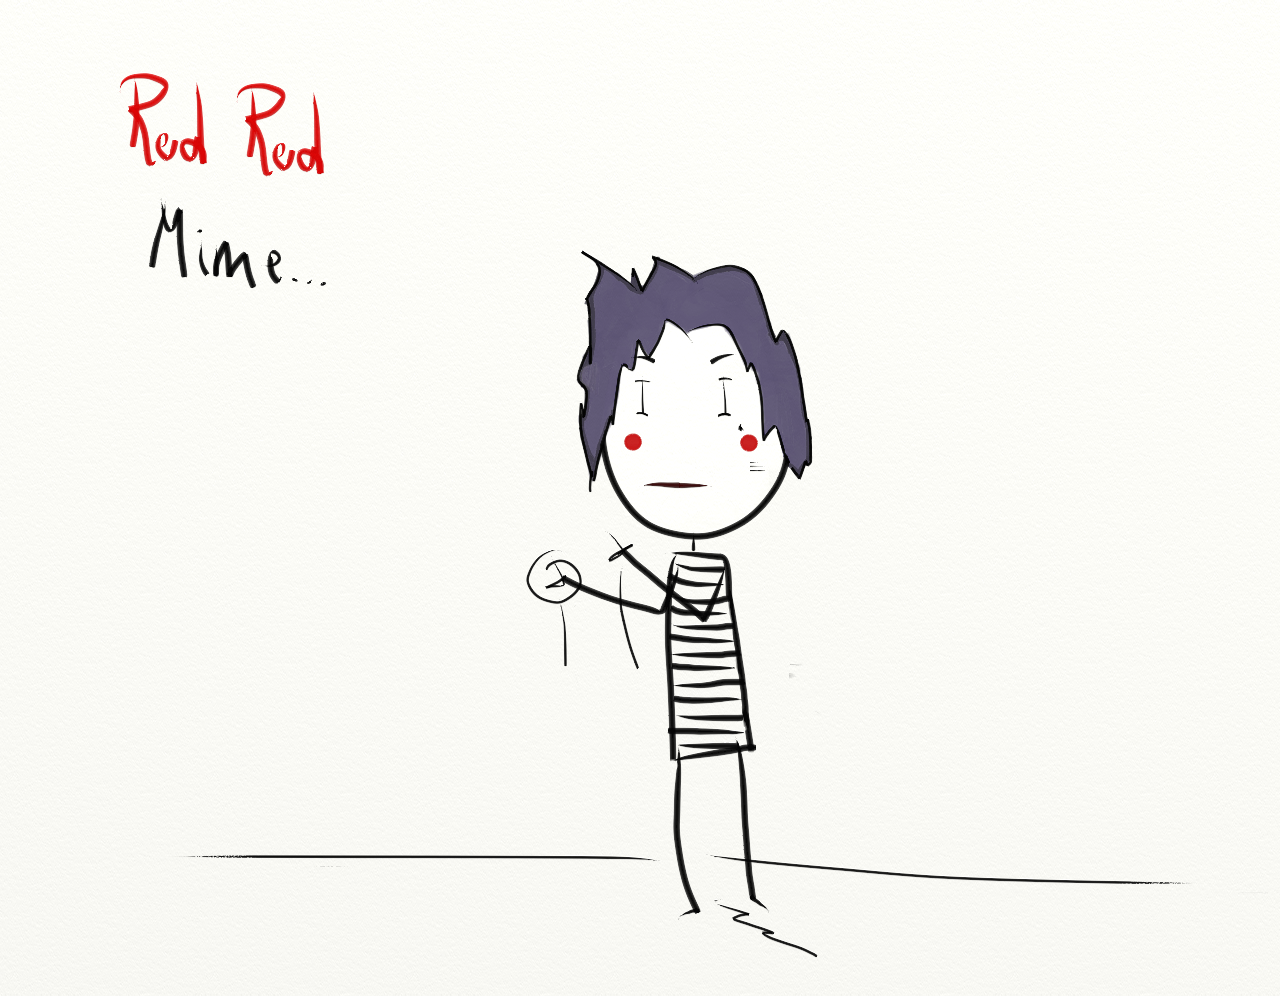 [Red,+Red+Mime.png]